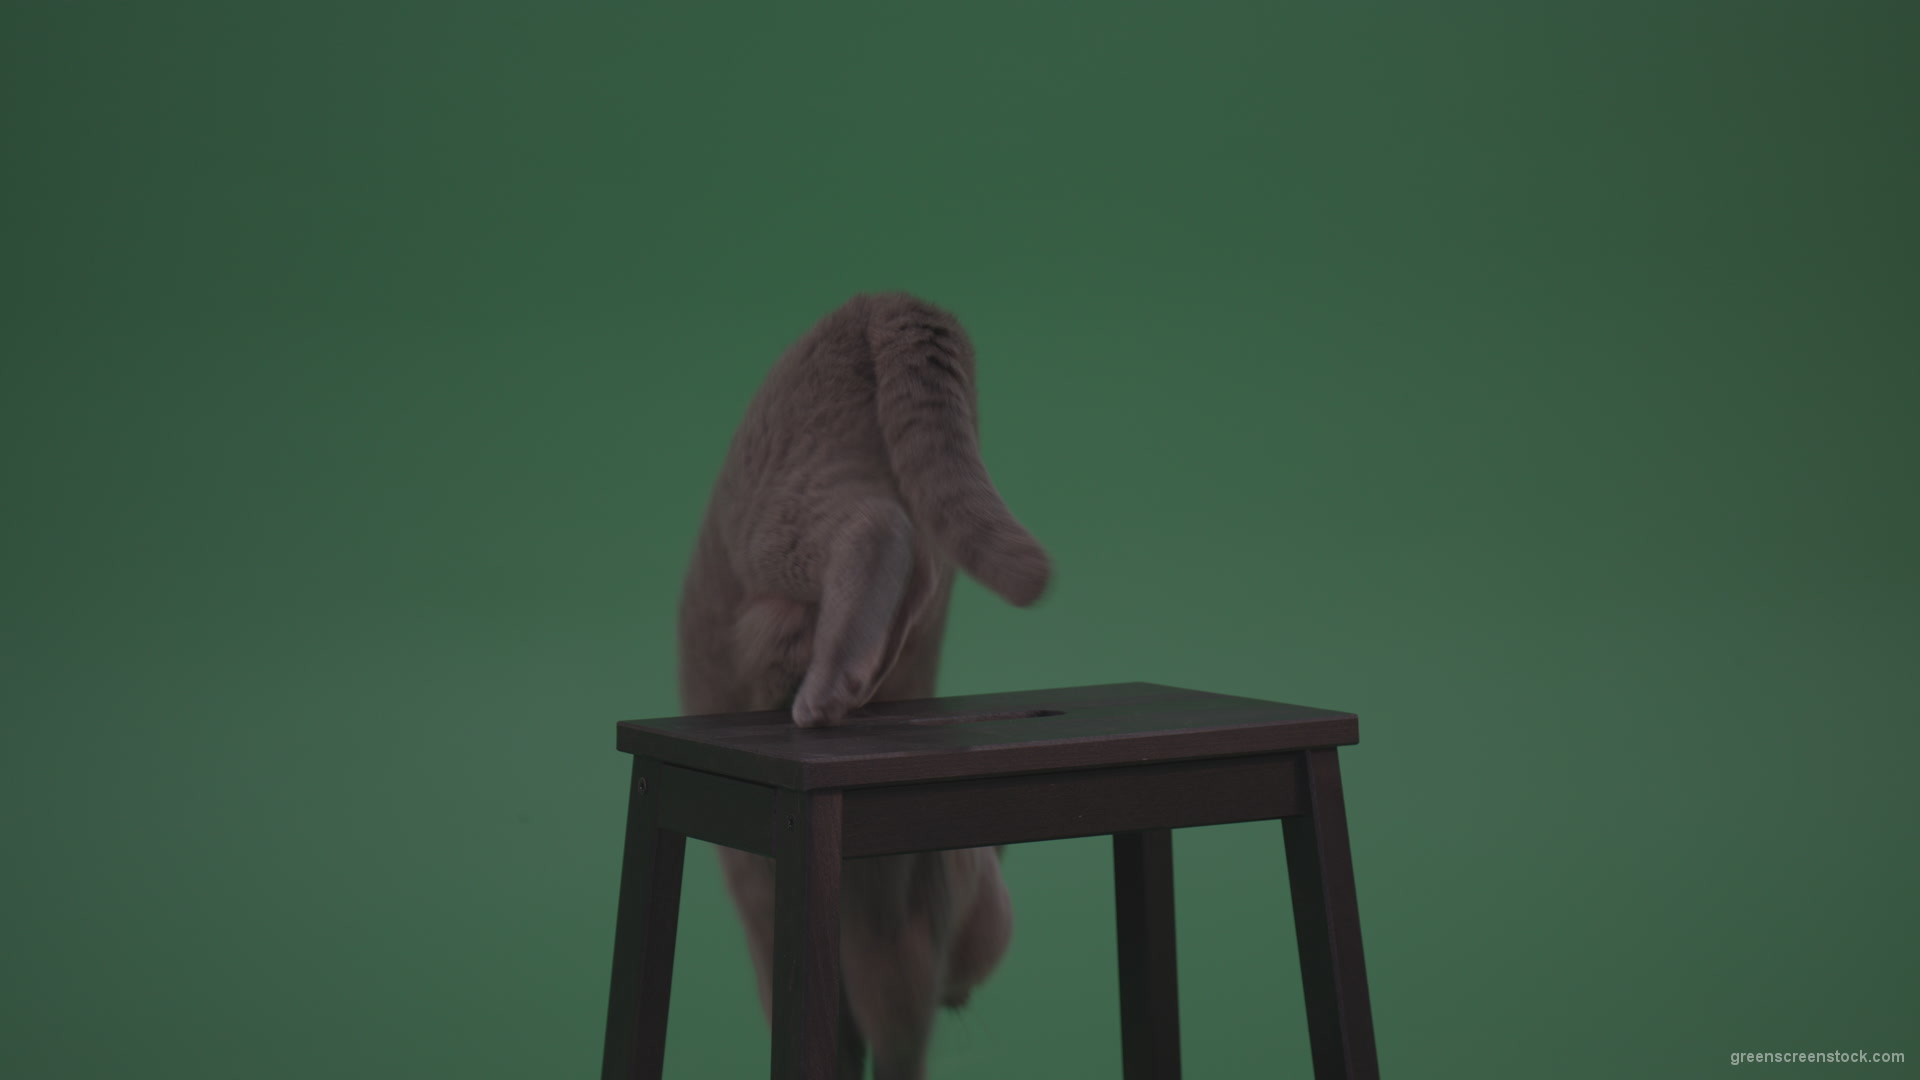 British-Gey-Cat-Sitting-On-Stool-Wagging-The-Tail-On_Green-Screen-Chroma-Key-Wall-Background_009 Green Screen Stock